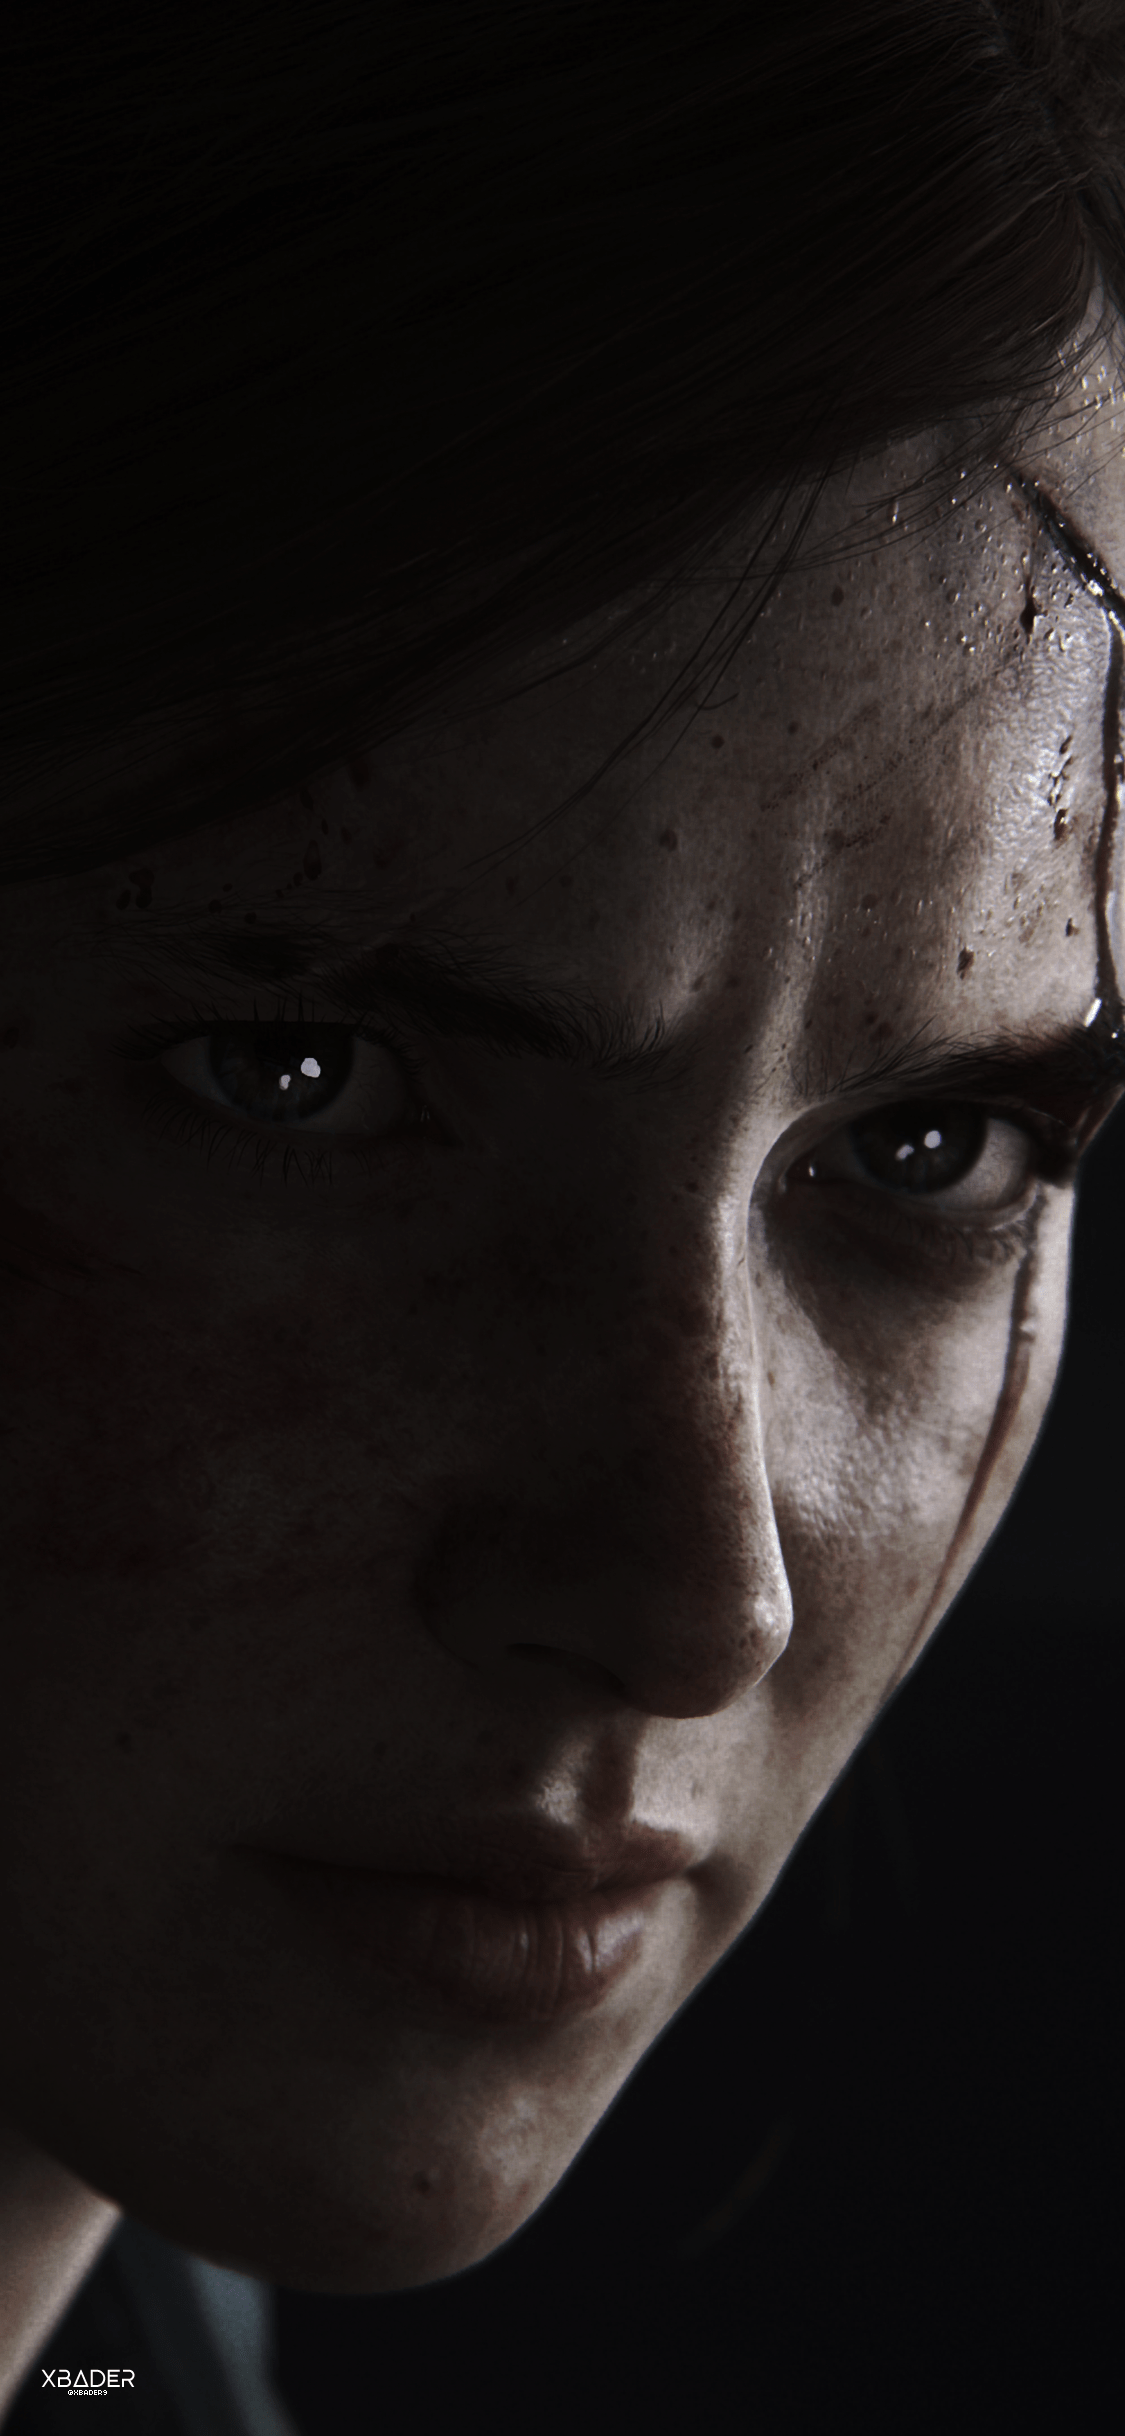 Top 9 The Last of Us 2 Wallpapers in HD and 4K